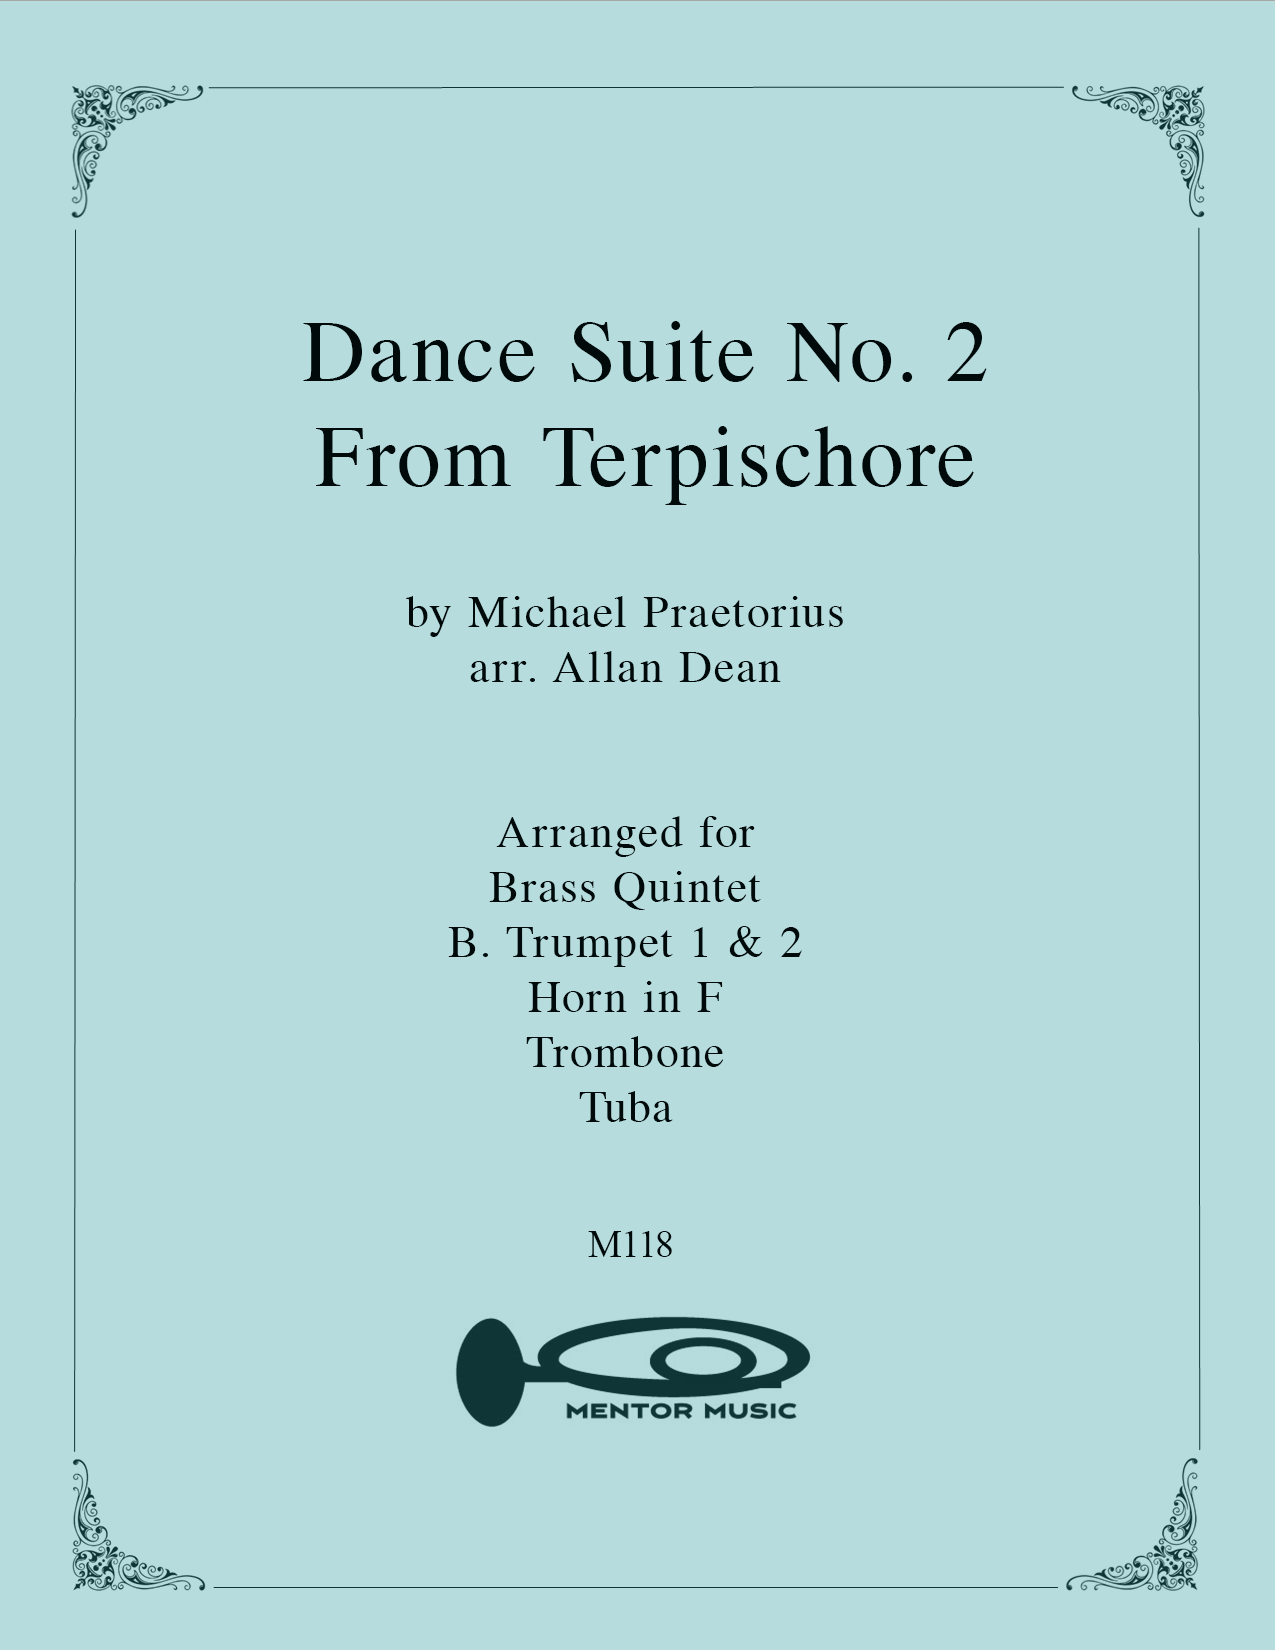 Dance Suite No. 2 From Terpsichore for Brass Quintet